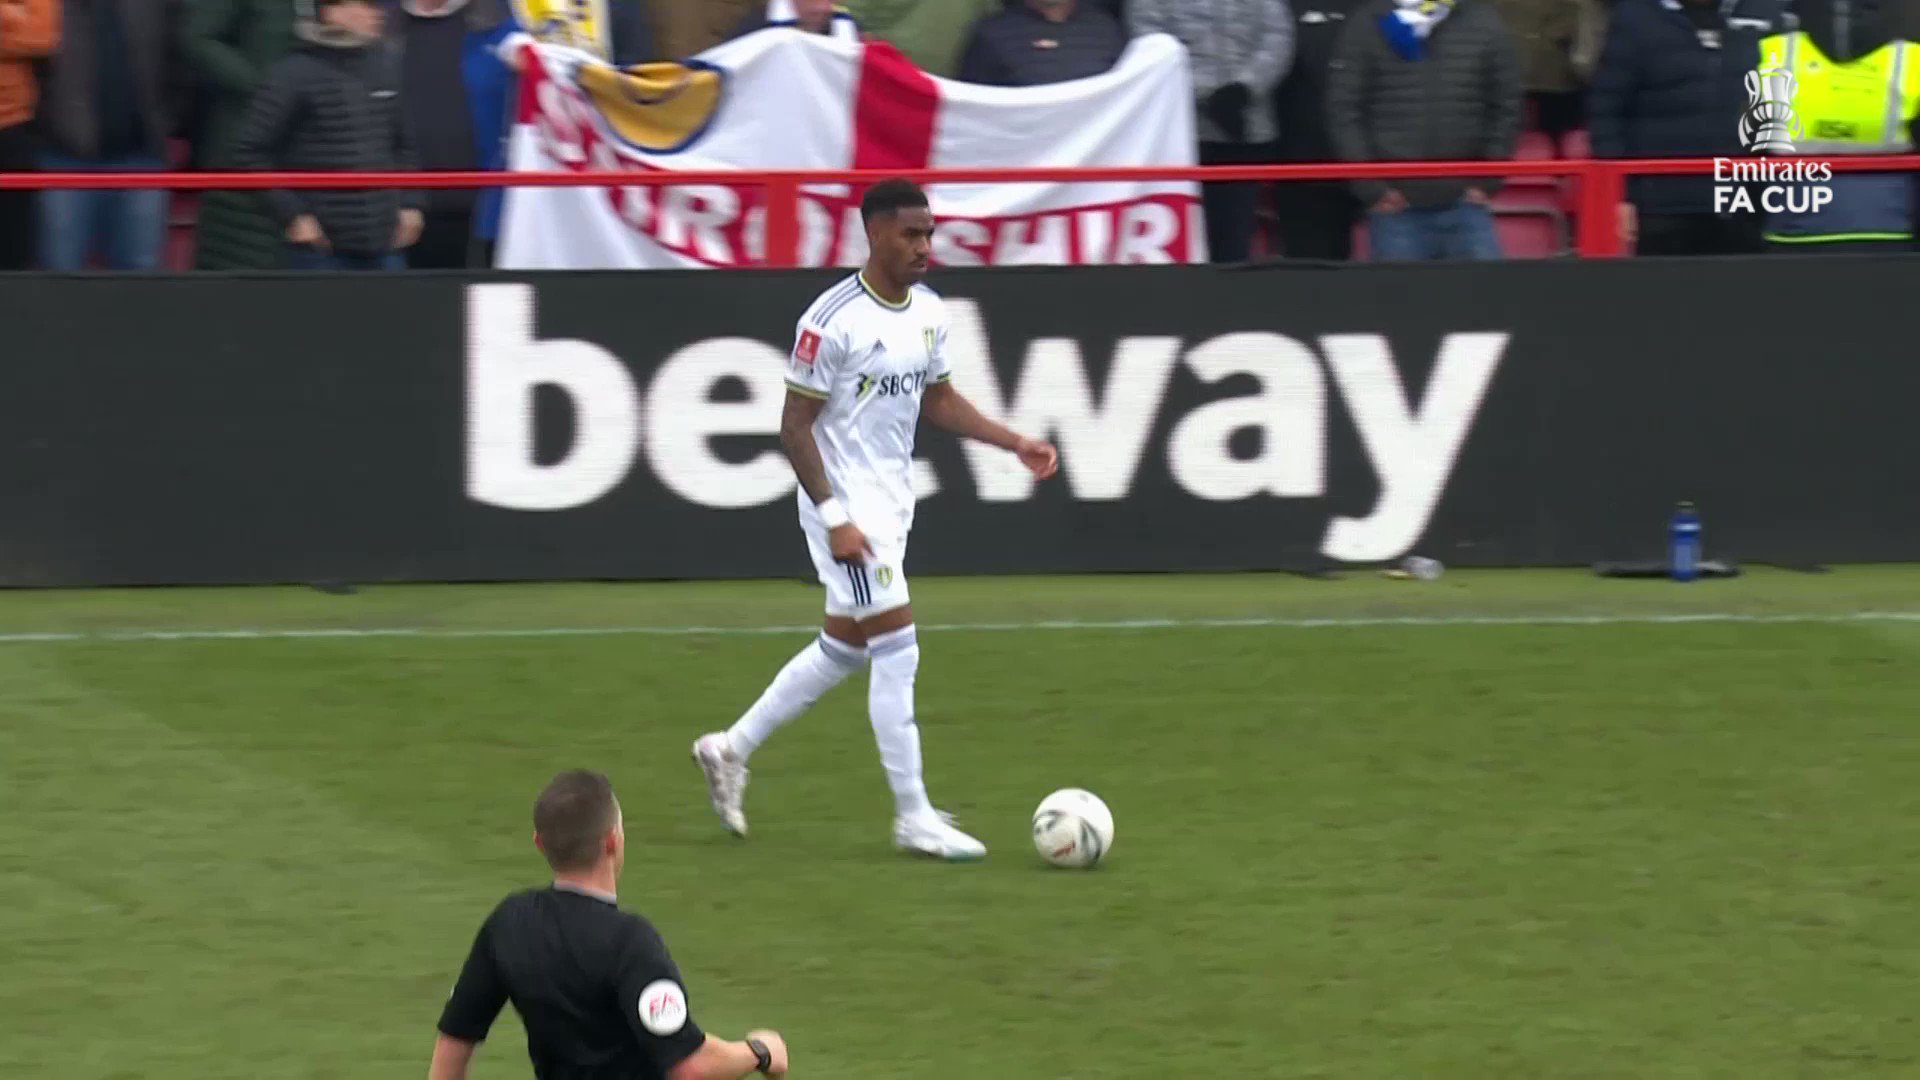 Just watch the assist It's a first @LUFC goal for @JuniorFirpo03 👏#EmiratesFACup”